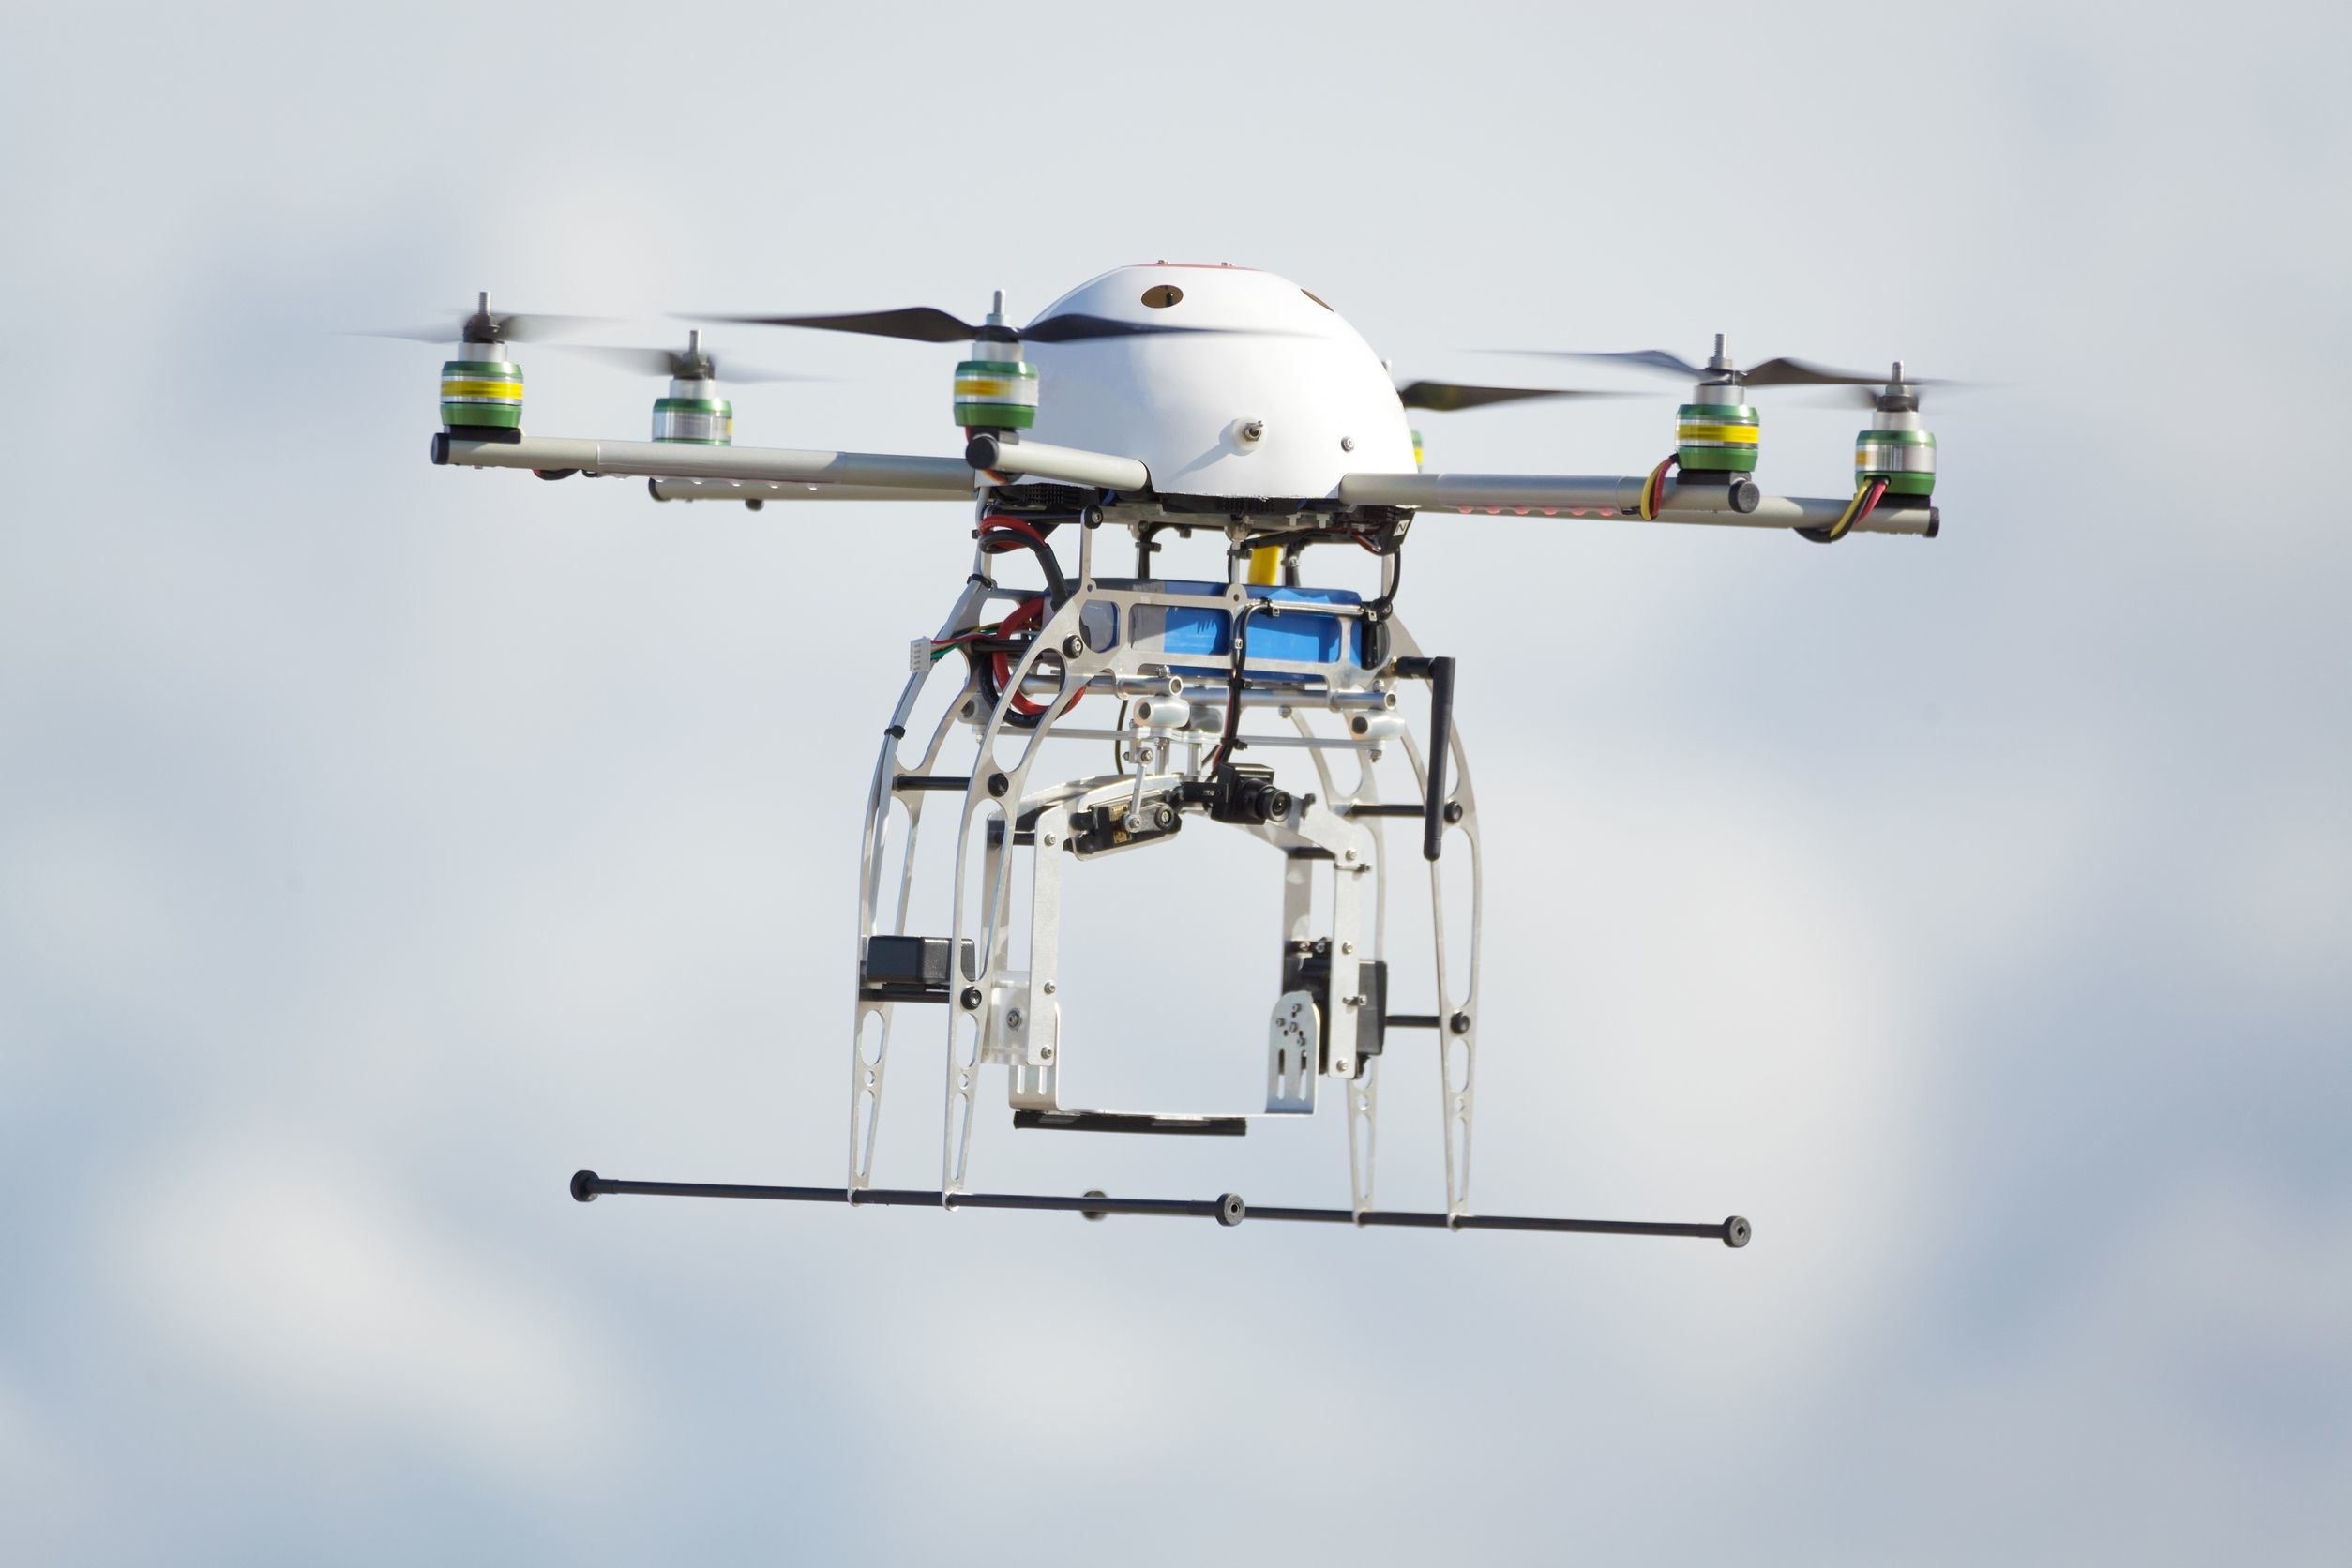 Newest Big Thing in Drones Is Technology to Block Them